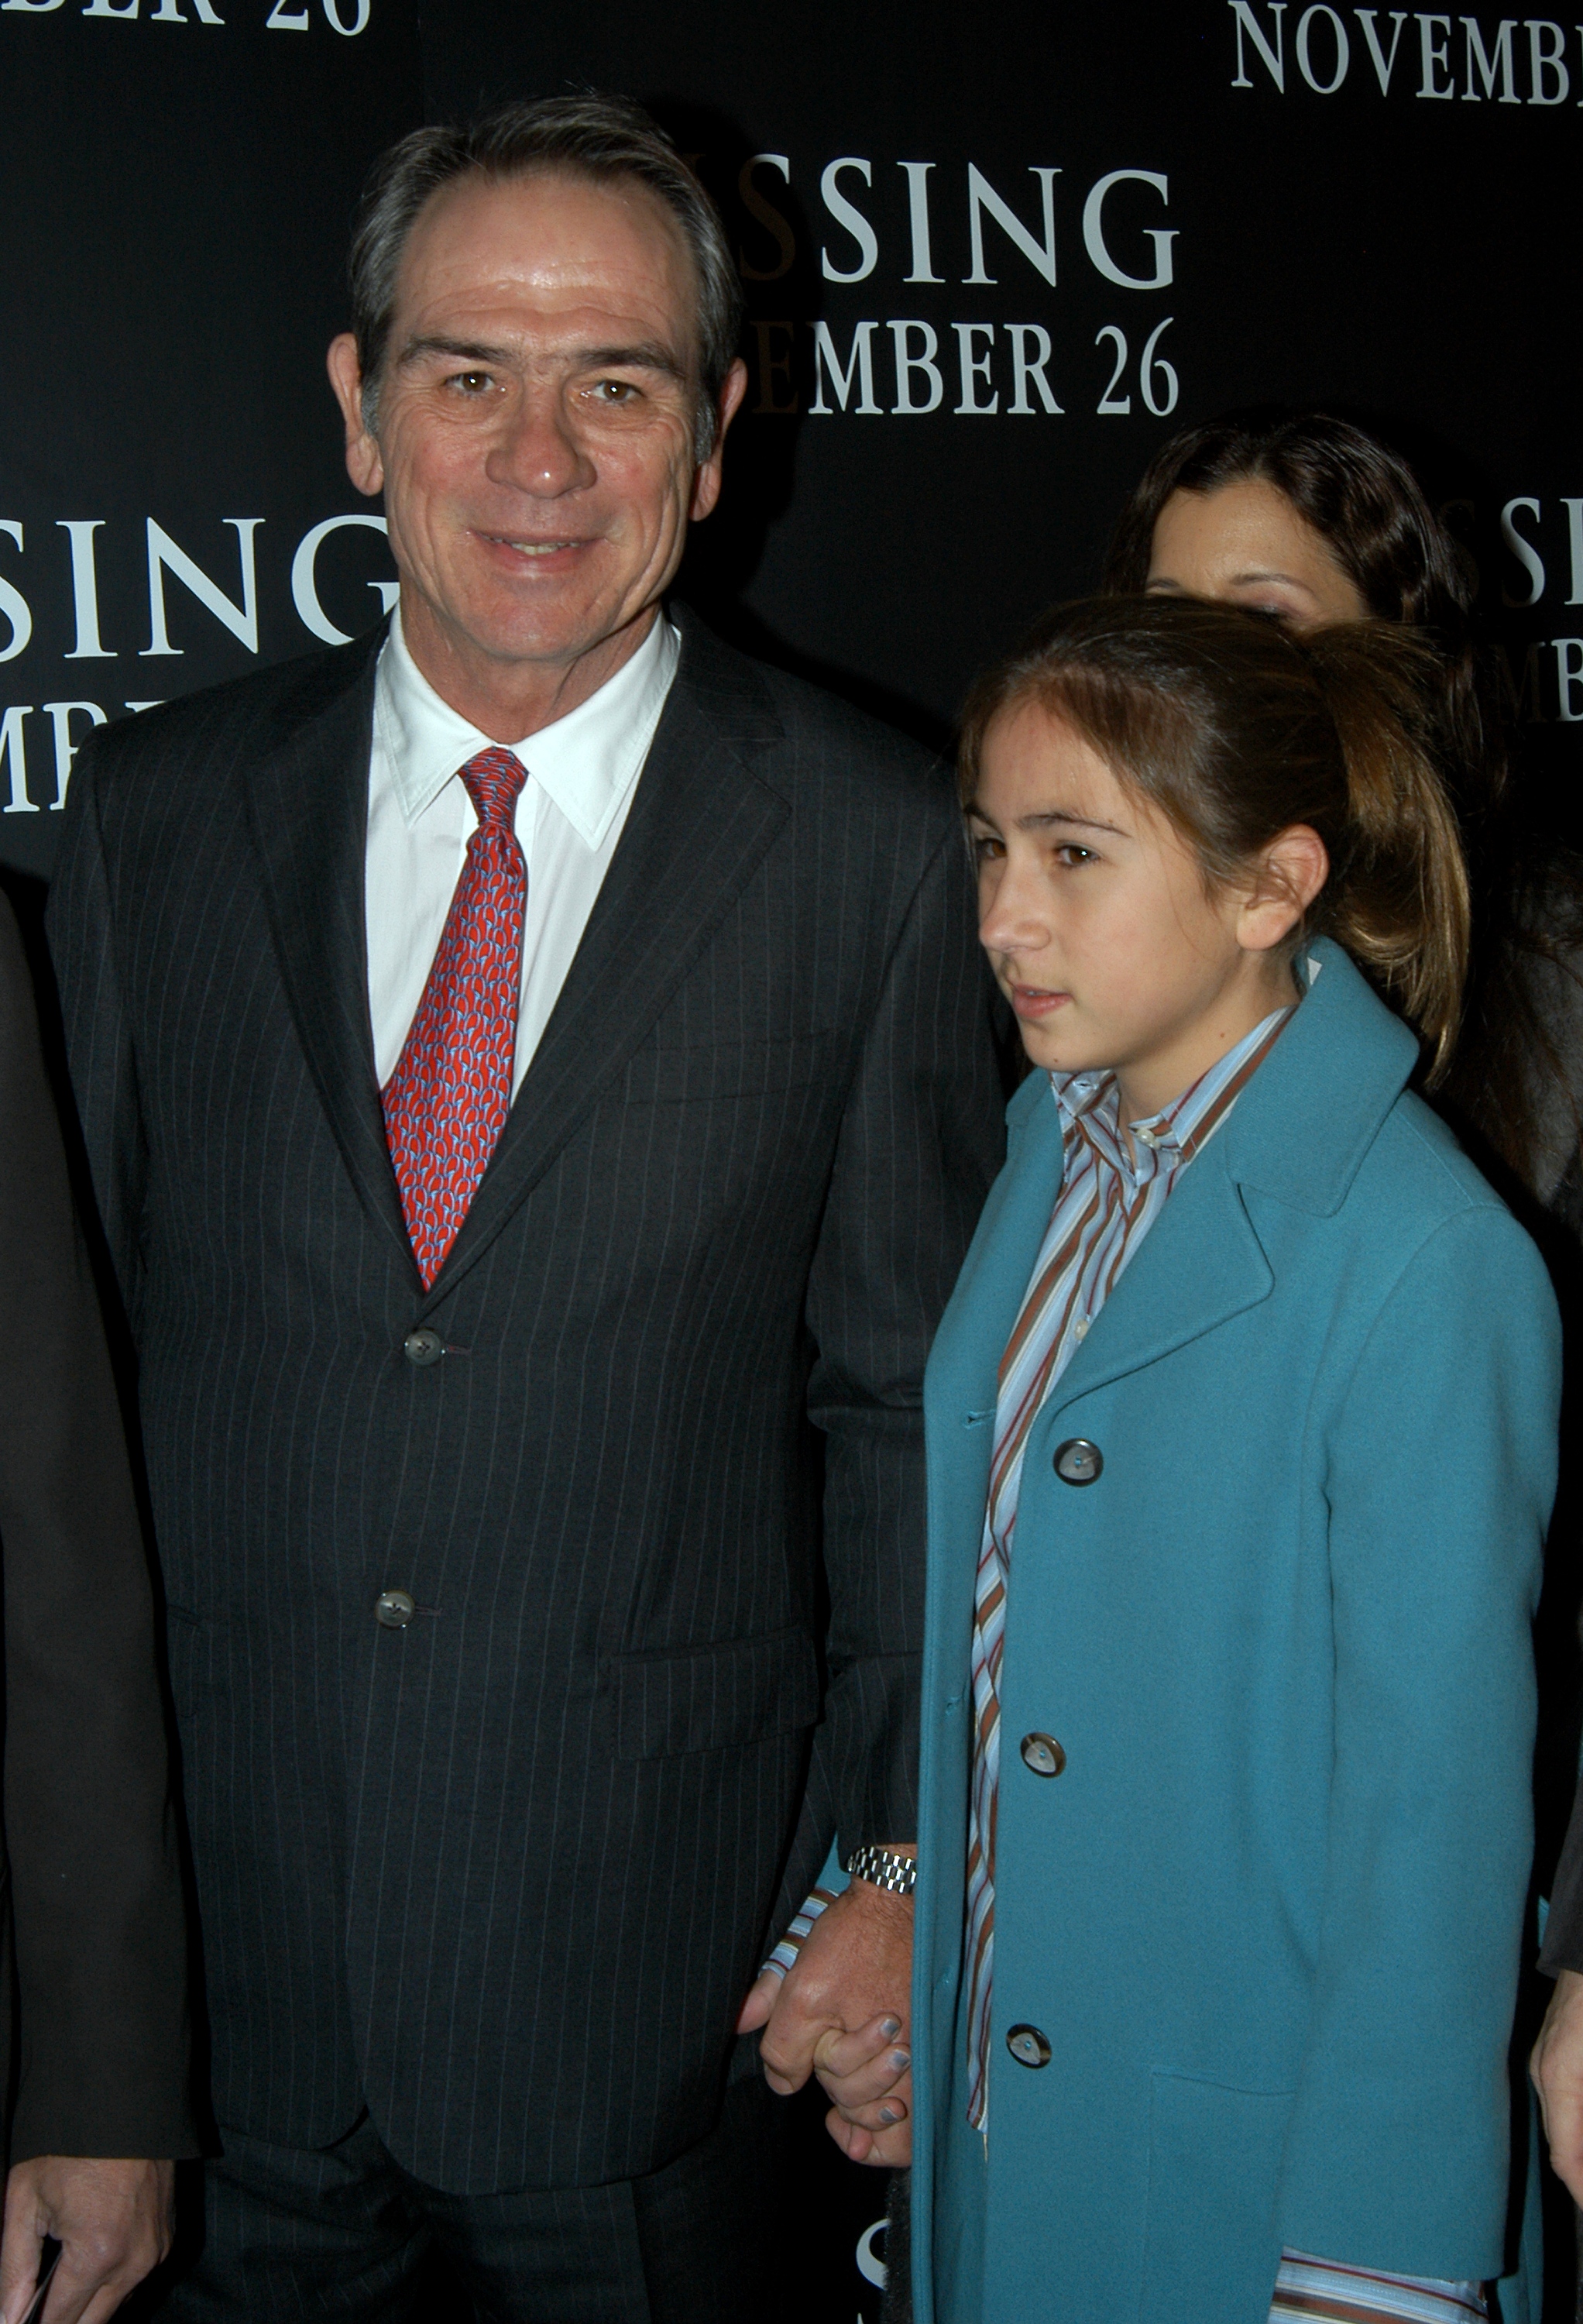 Tommy Lee Jones and his daughter, Victoria, at the New York premiere of "The Missing" on November 16, 2003 | Source: Getty Images